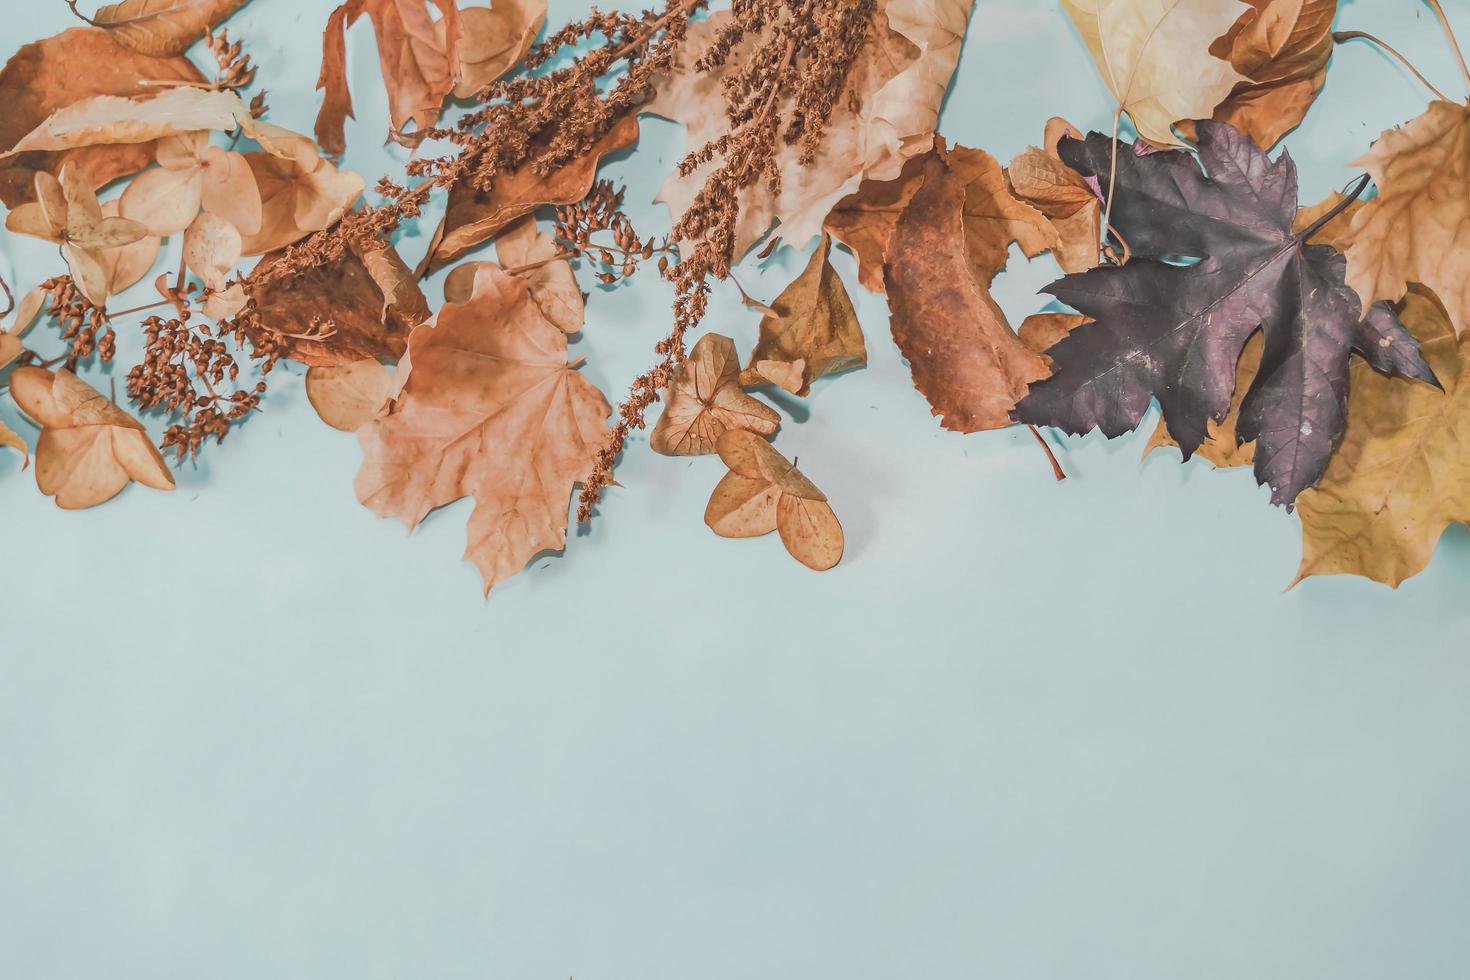 Autumn composition. autumn leaves on bright blue pastel background. Flat lay, top view copy space. photo